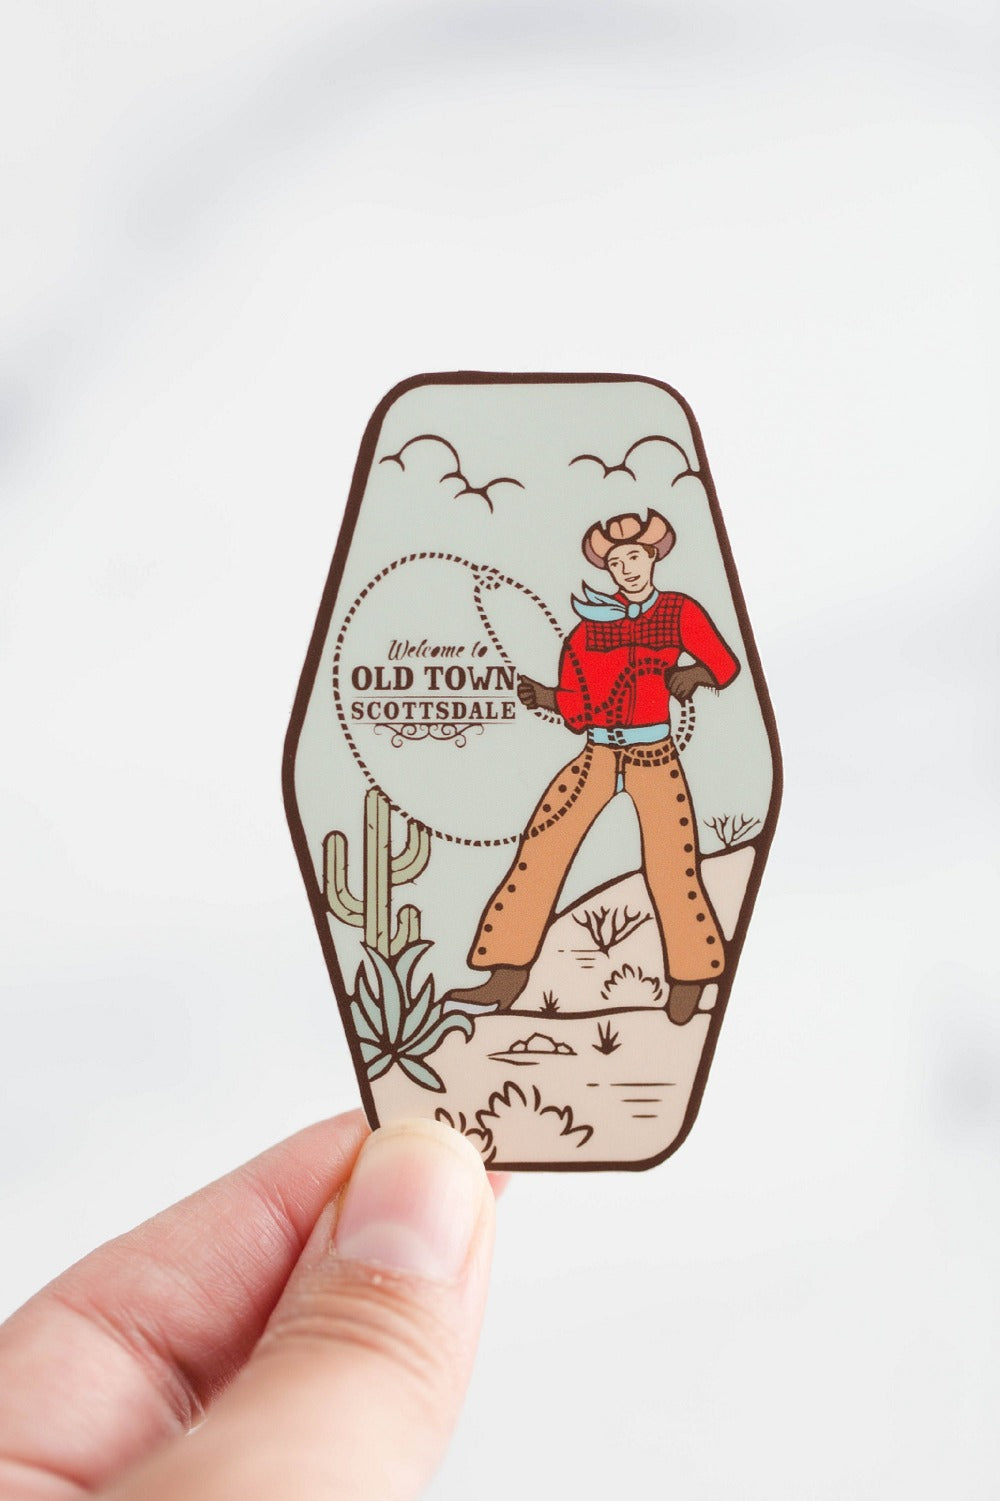 Welcome to Old Town Scottsdale Cowboy Vinyl Sticker Decal